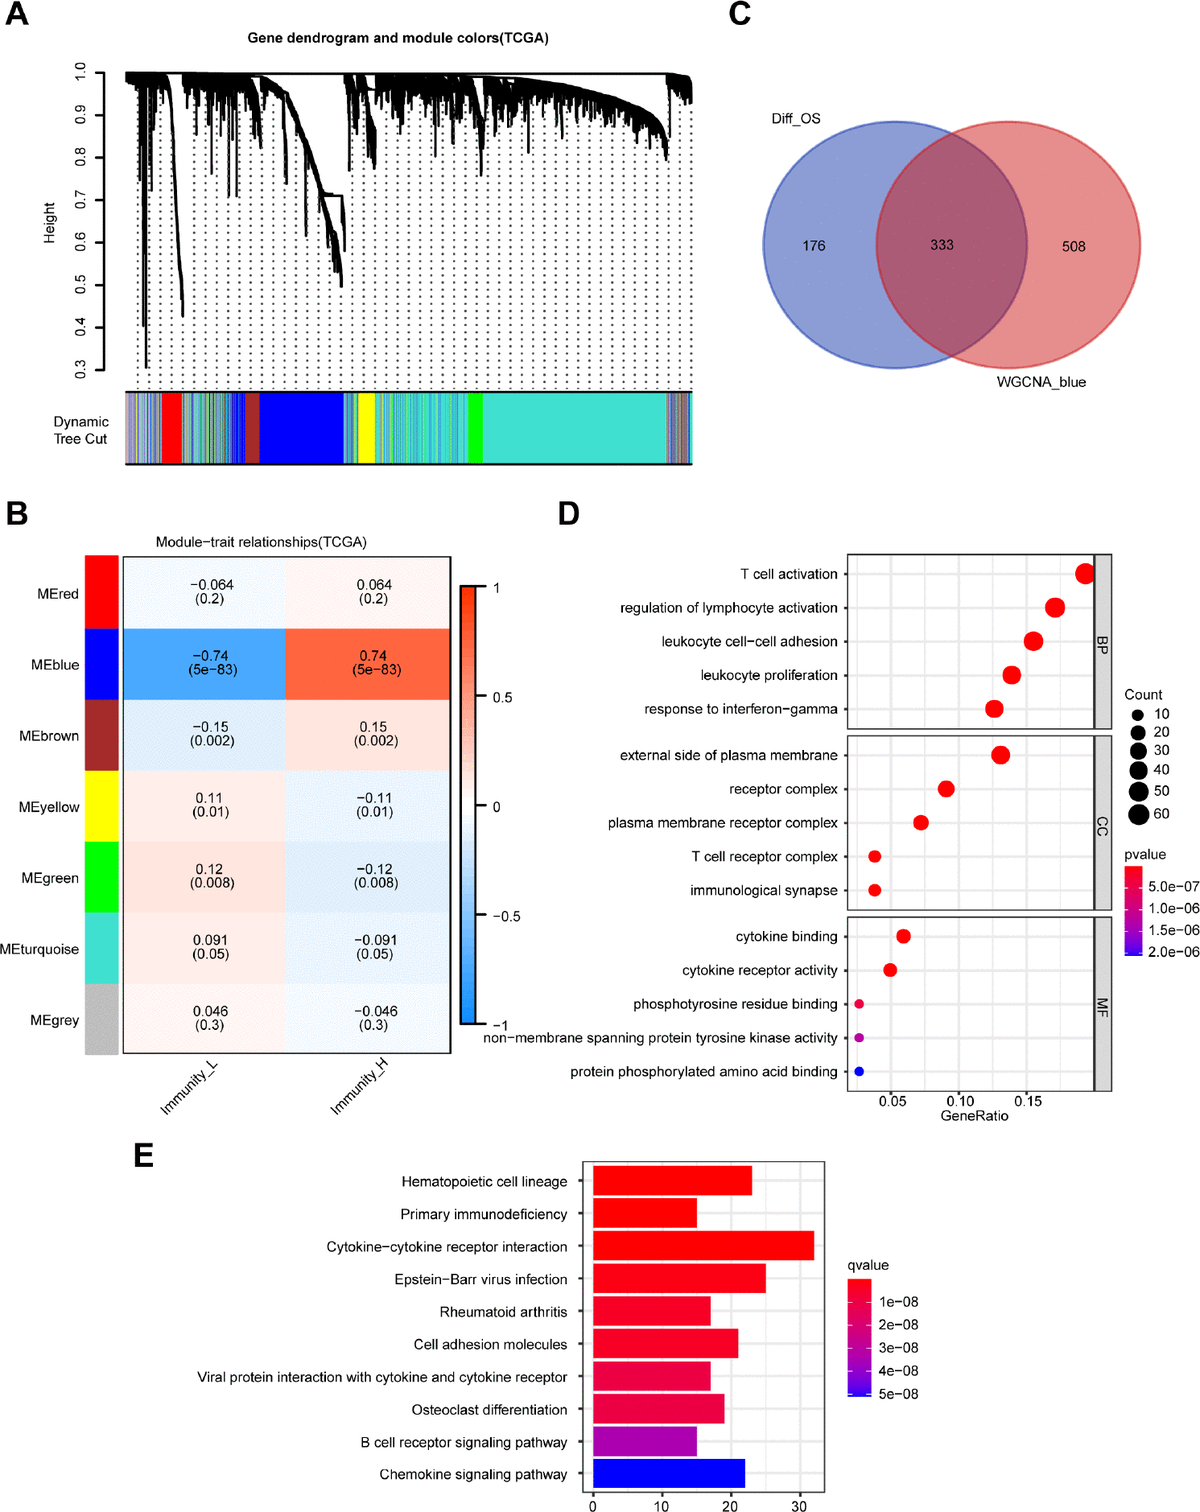 Identification of highly immune-related DEGs with prognostic value and functional analysis. (A) A hierarchical clustering dendrogram is built to detect co-expressed genes in modules in the TCGA dataset of melanoma. (B) A heatmap showing the relationships of consensus module-trait in different modules under the low and high immune cell infiltration groups. (C) Identification of 333 common DEGs from 509 DEGs with prognostic value and the blue module using the Venn diagram software. (D) Top 15 GO terms. (E) Top 10 KEGG pathways.